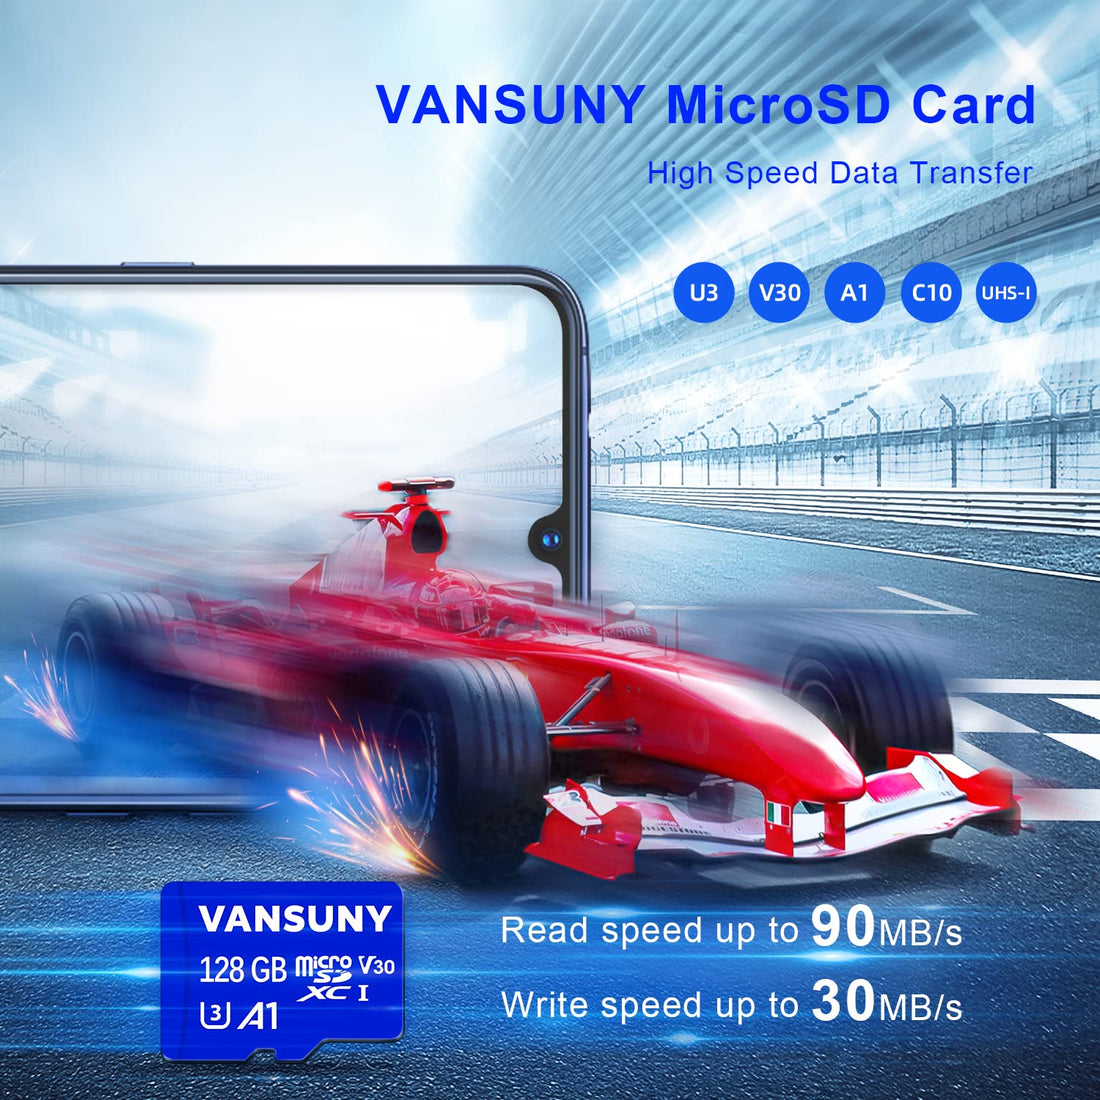 Vansuny Micro SD Card 128GB 2 Pack microSDXC Memory Card with SD Adapter A1 App Performance V30 4K Video Recording C10 U3 Micro SD for Phone, Security Camera, Dash Cam, Action Camera